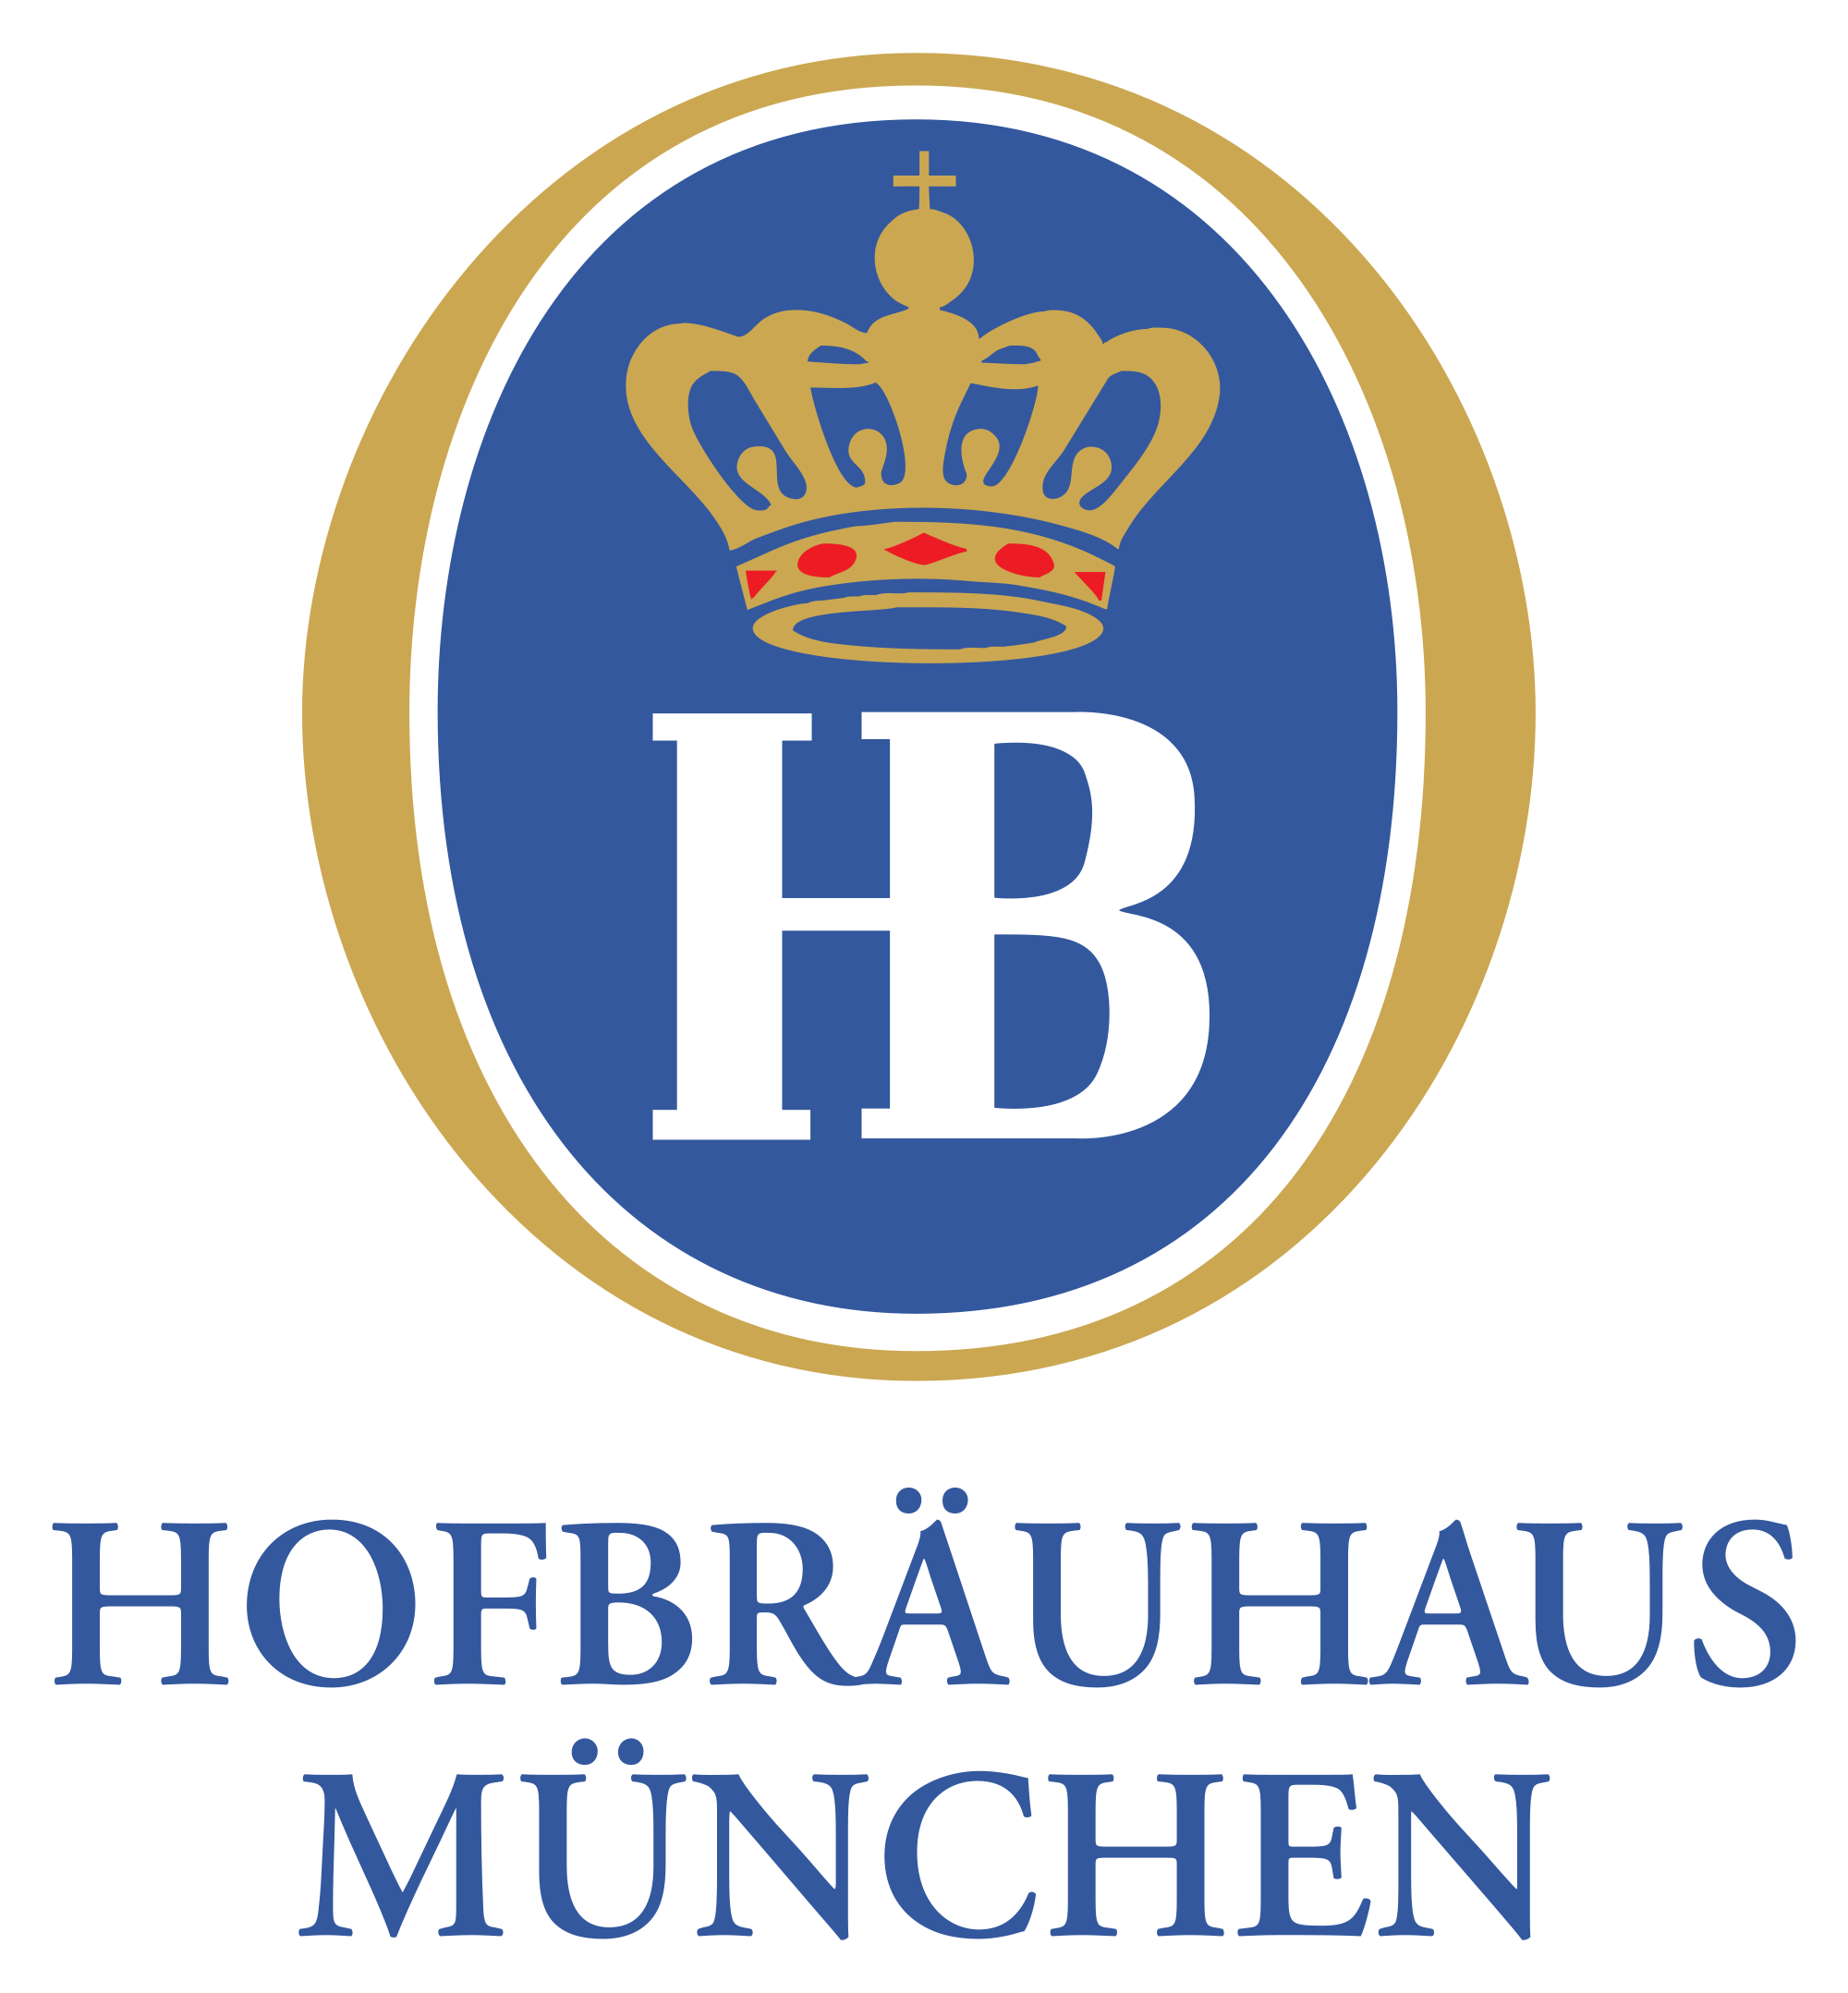 Staatliches_Hofbräuhaus_Logo_(2002-Present).png